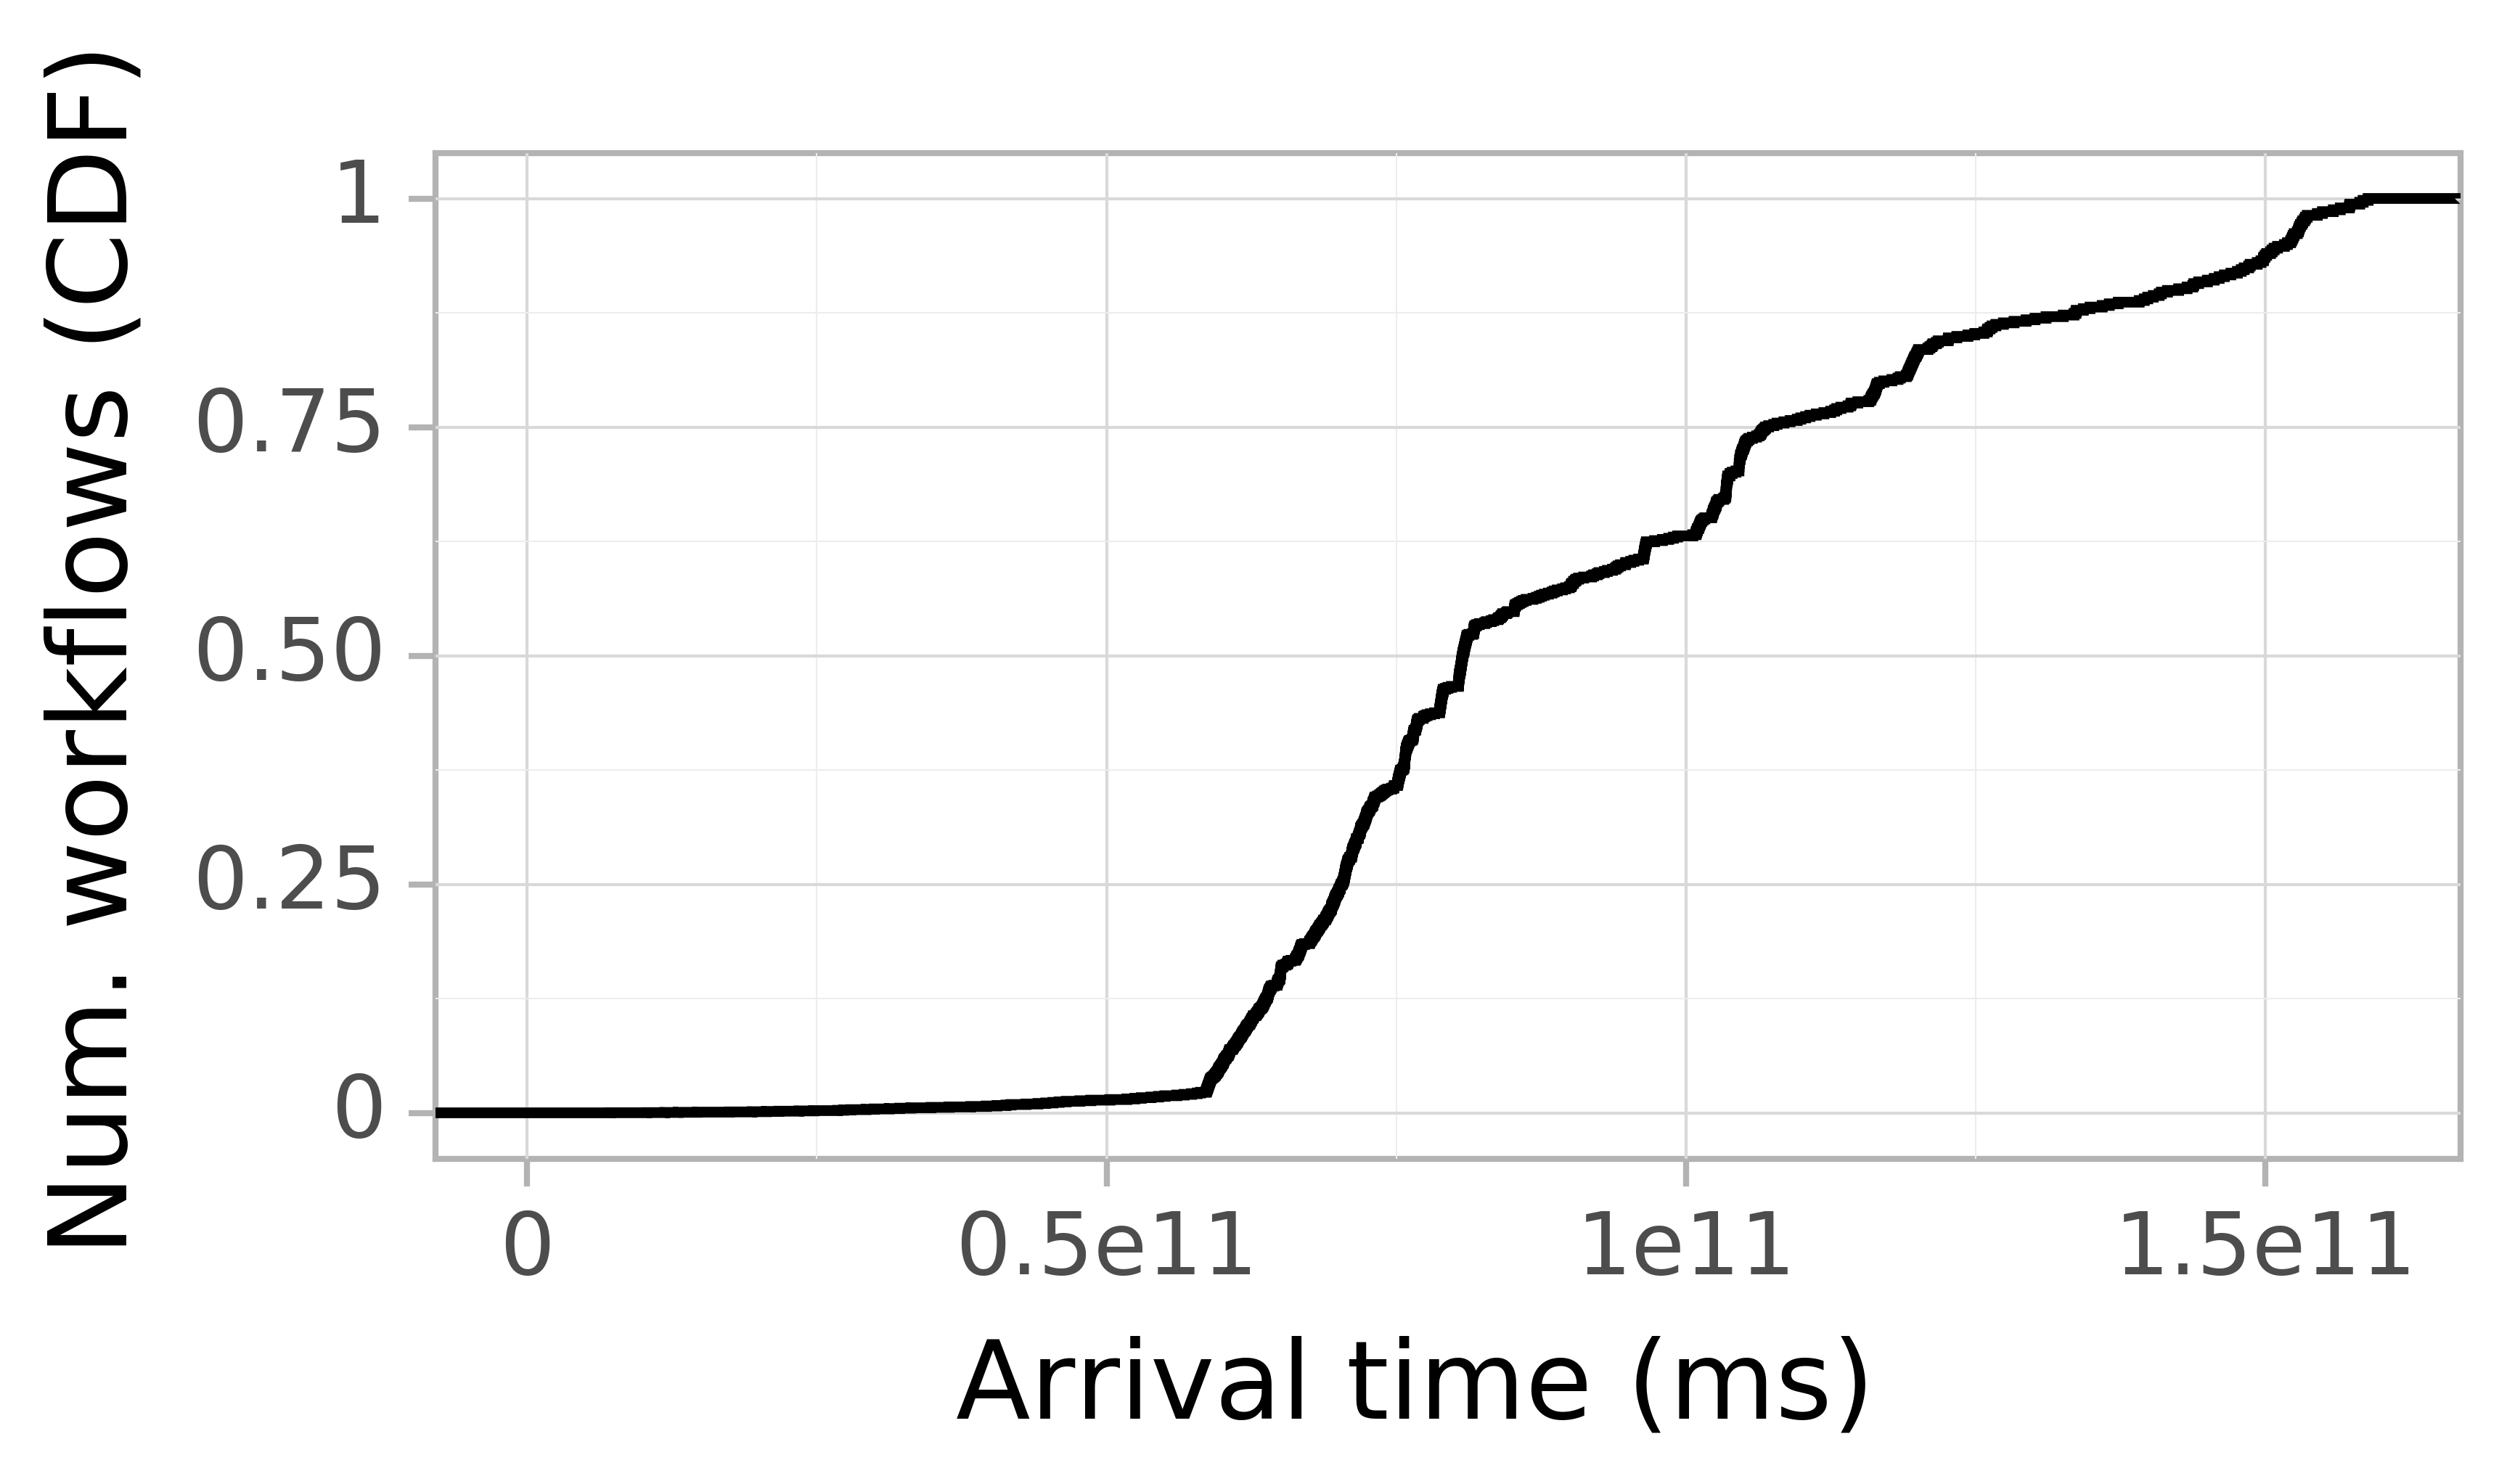 Job arrival CDF graph for the LANL_Mustang trace.